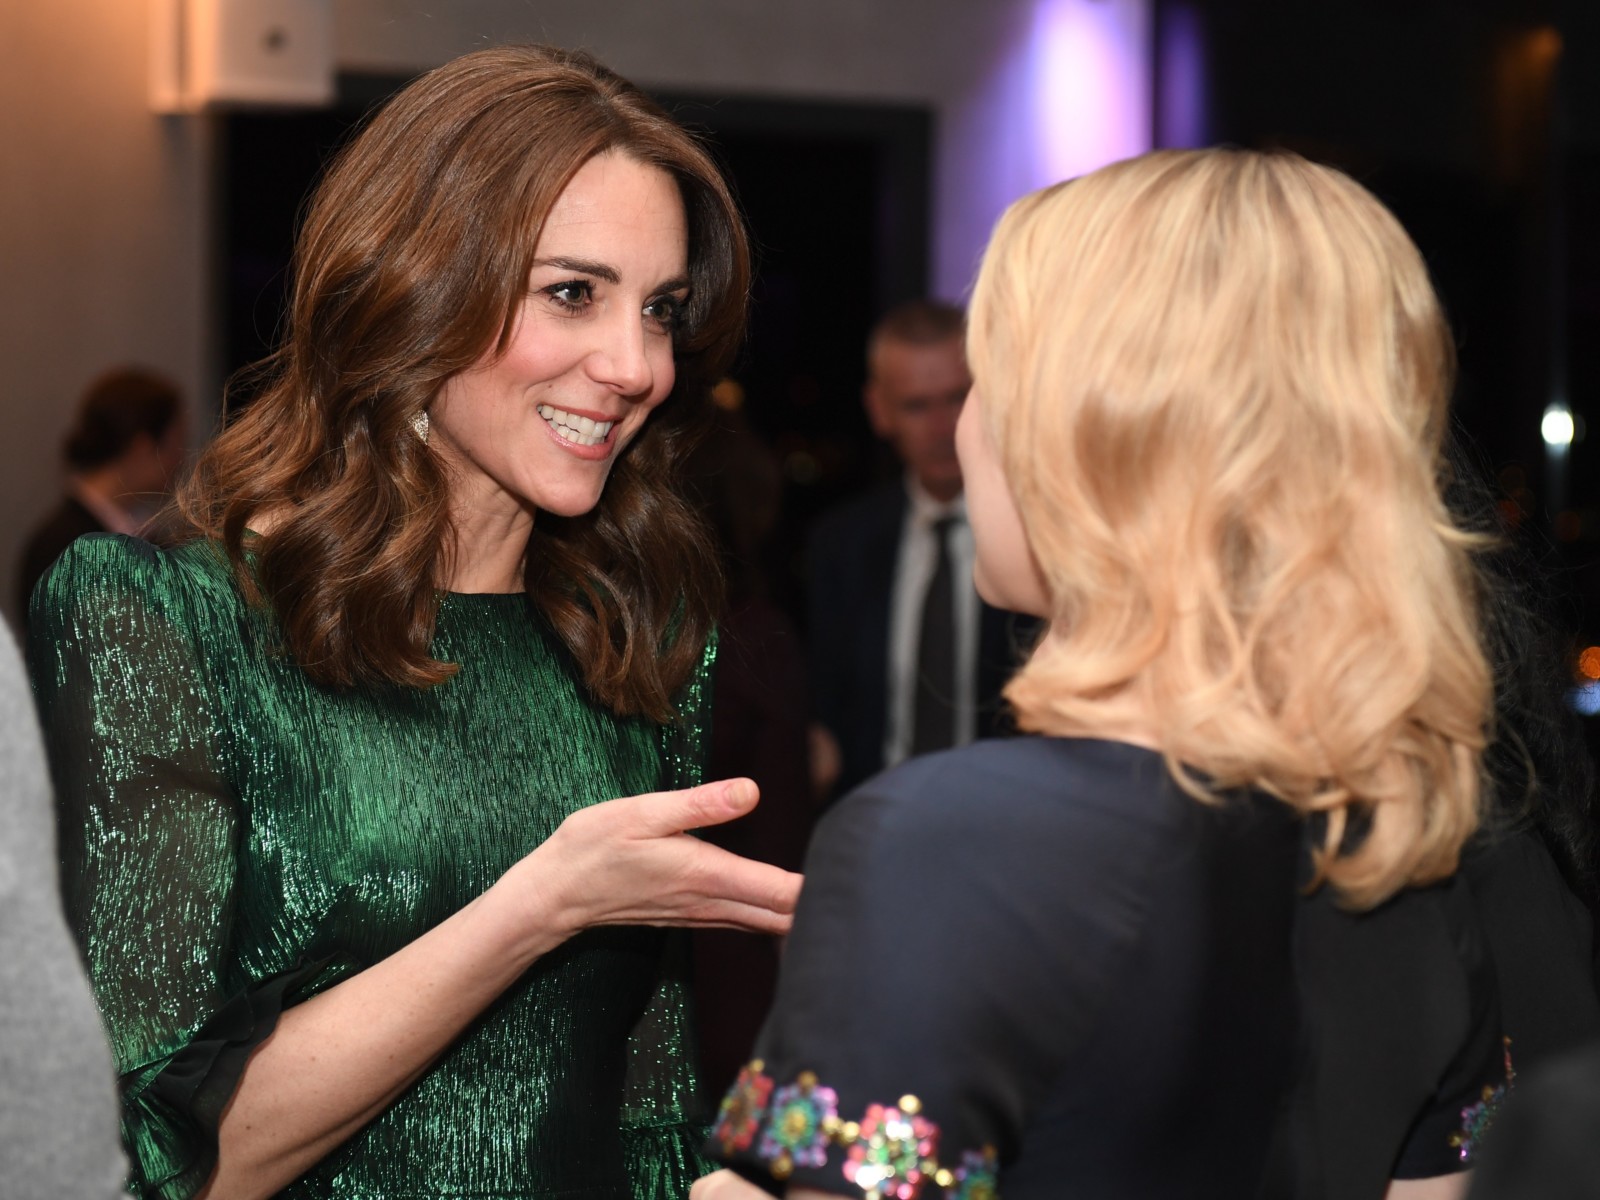 Kate and William are still shaking hands with people they meet